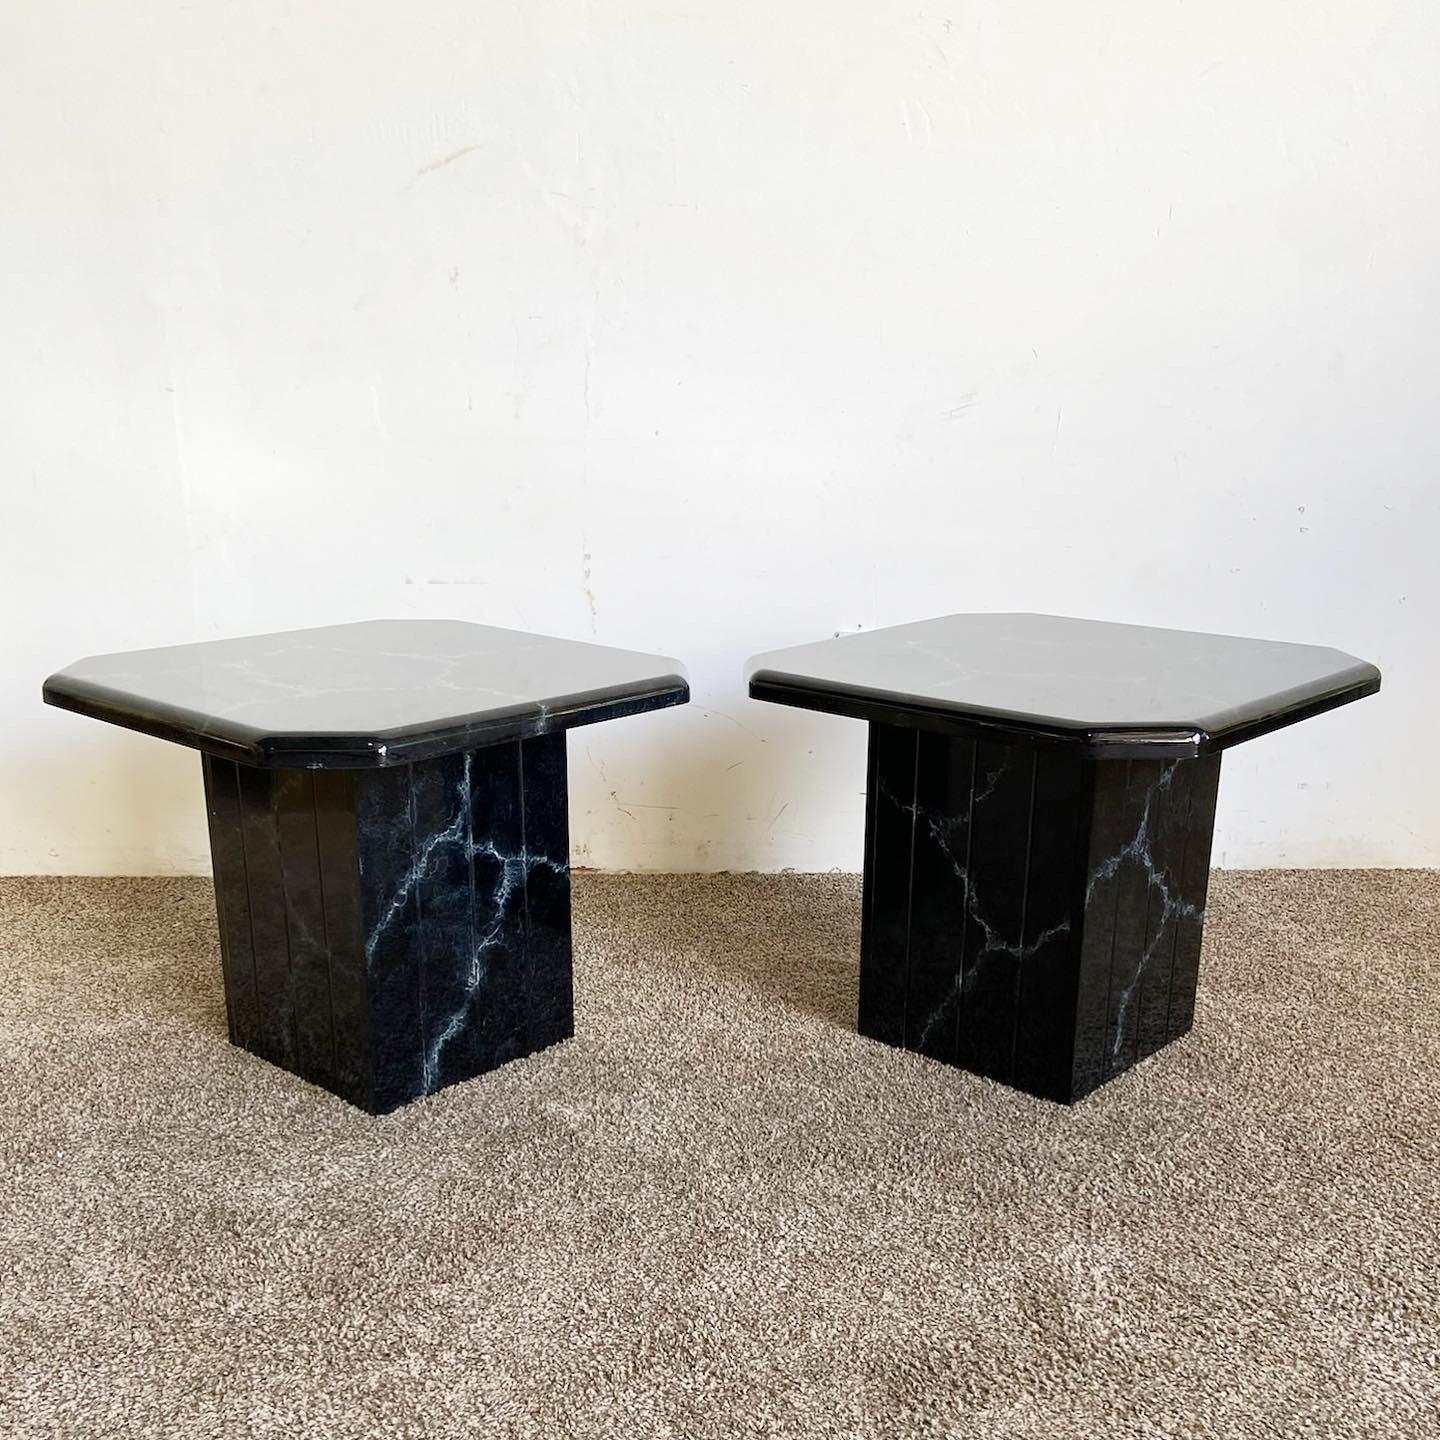 Elevate your space with the wonderful vintage postmodern pair of mushroom side tables. Each table features a black faux marble finish over wood, adding a touch of sophistication and style to your room.

Wonderful vintage postmodern pair of mushroom